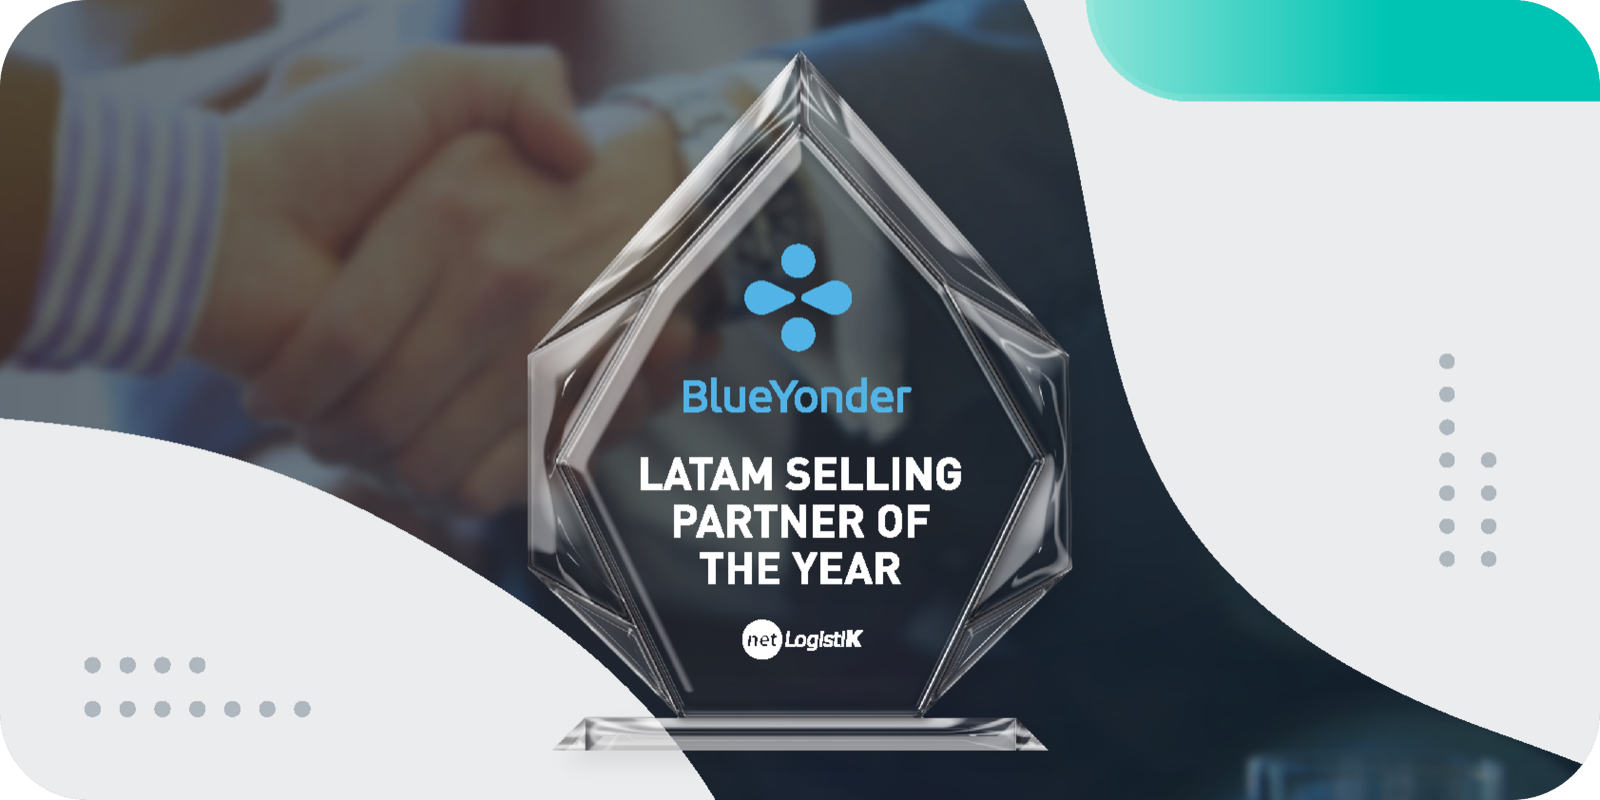 LATAM Selling Partner of the Year 2021